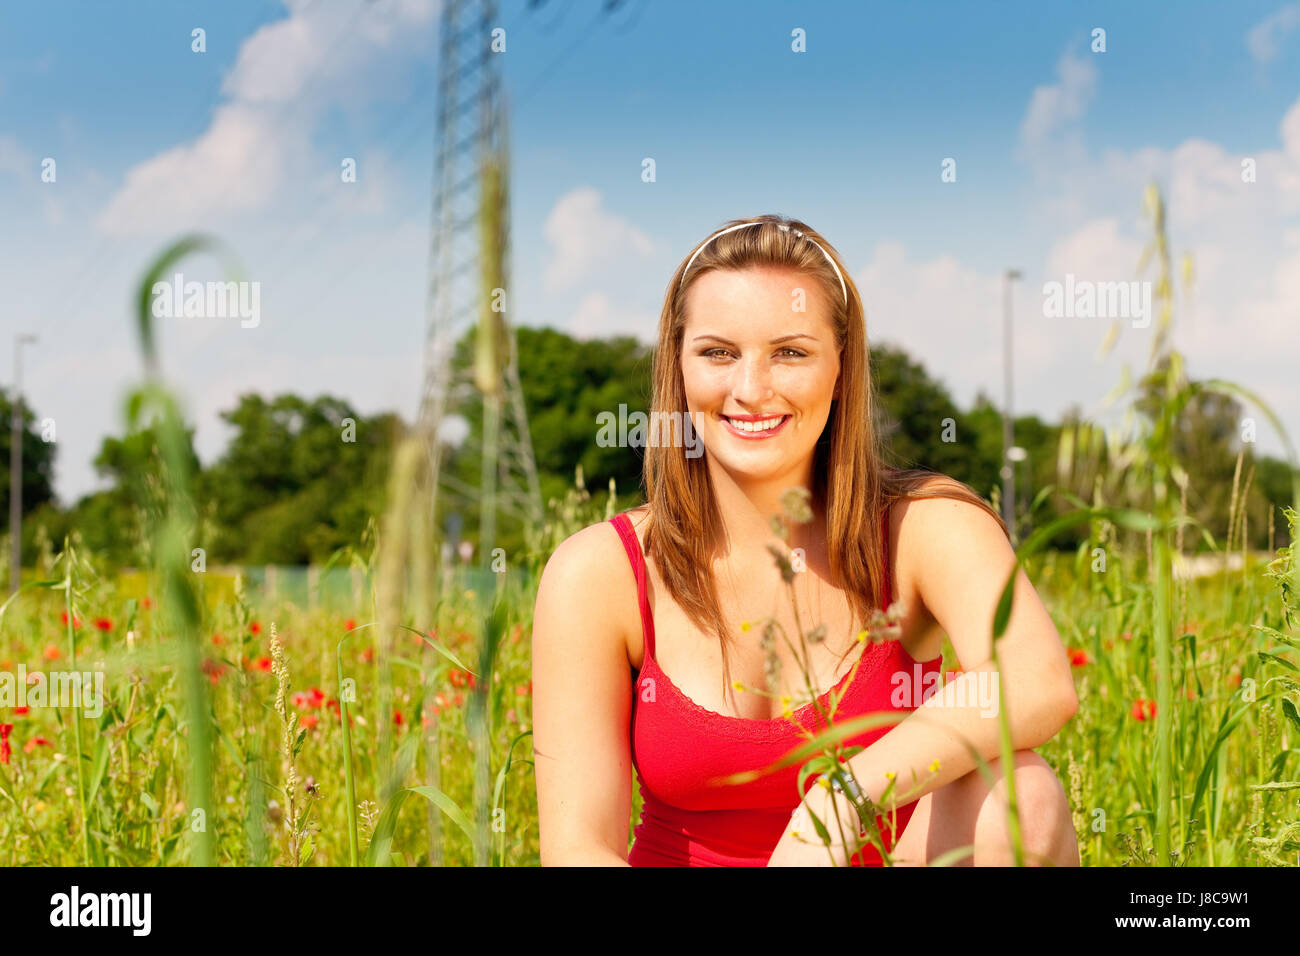 woman, field, crouch, crouching, put, sitting, sit, meadow, grain, cereal, Stock Photo